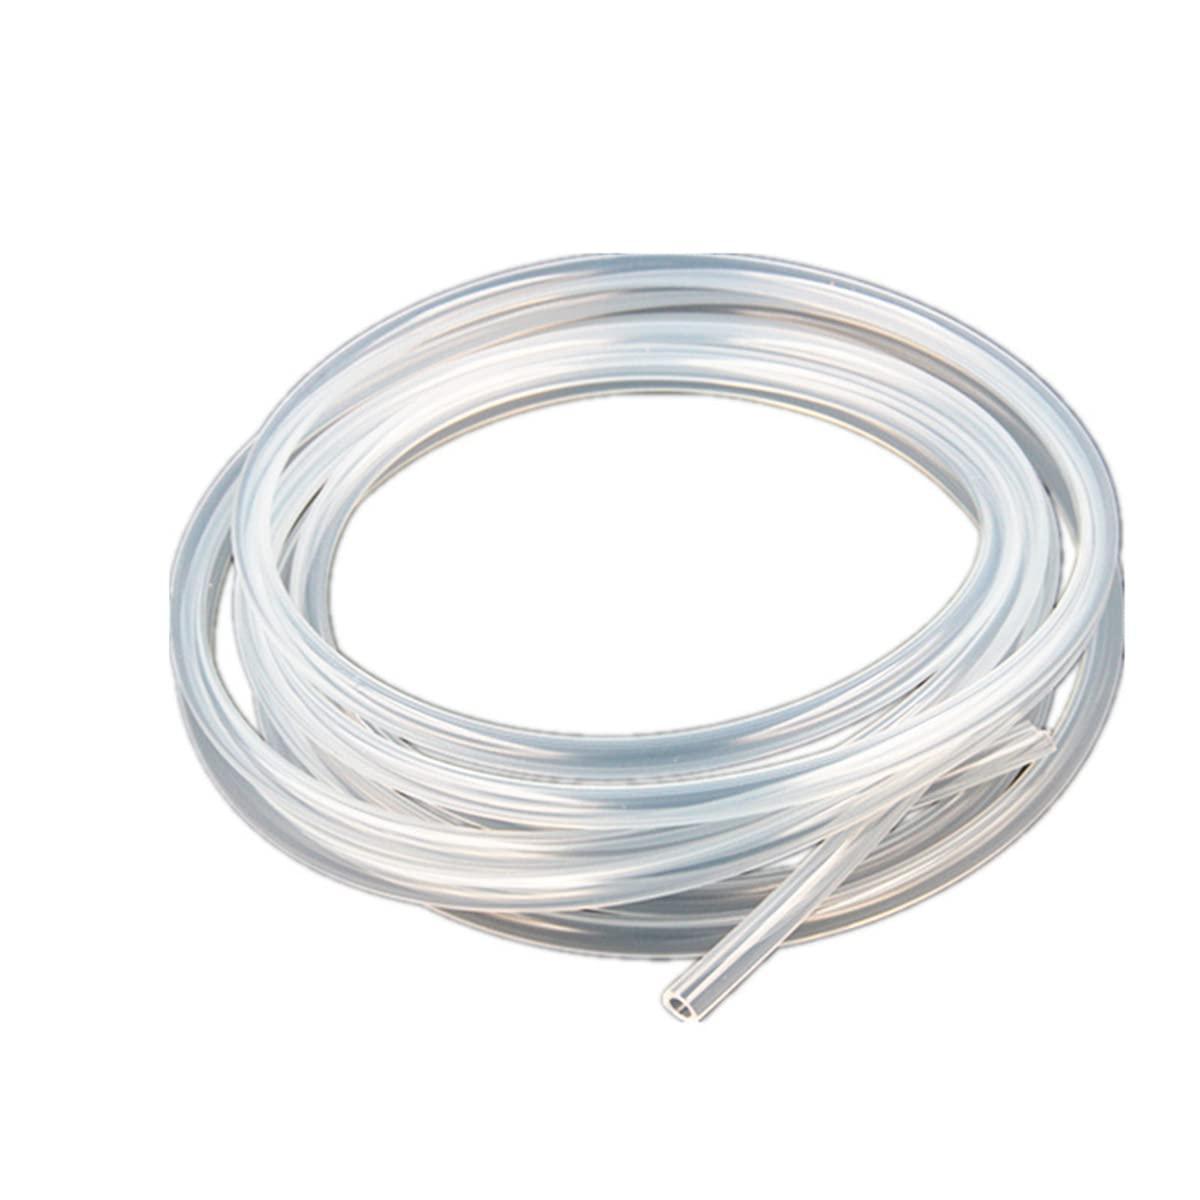 MACHSWON Silicone Tube 9mm ID 12mm OD 50.18ft Transparent Silicone Rubber Tube Silicone Tube Food Grade Air Hose for Pump Transfer 15.3m